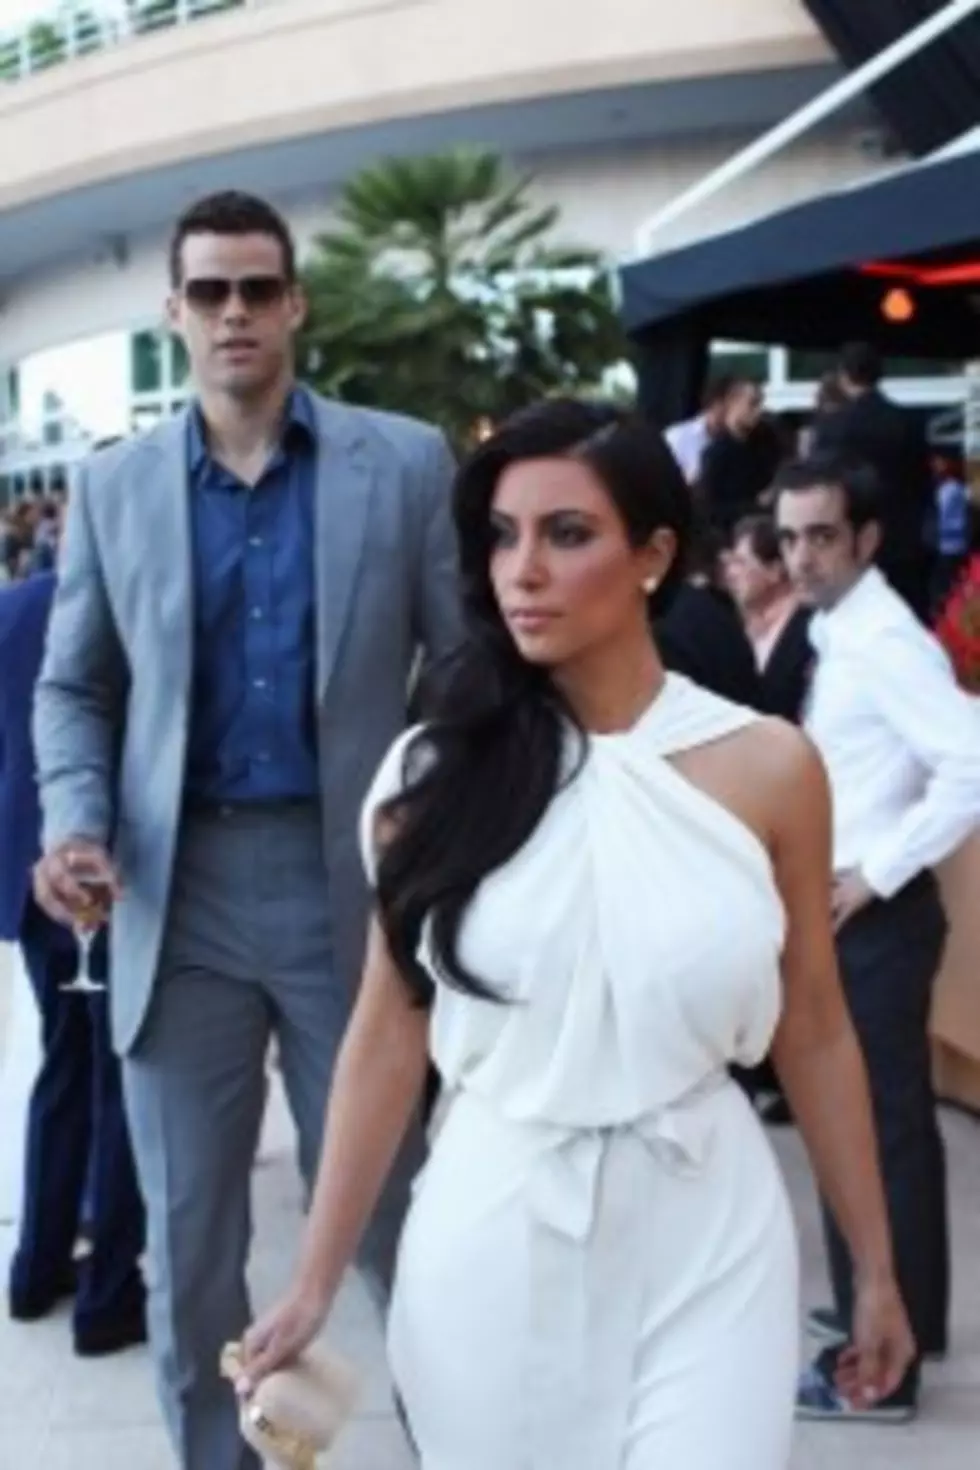 Kim Kardashian Files For Divorce From Kris Humphries After Only 72 Days Of Marriage